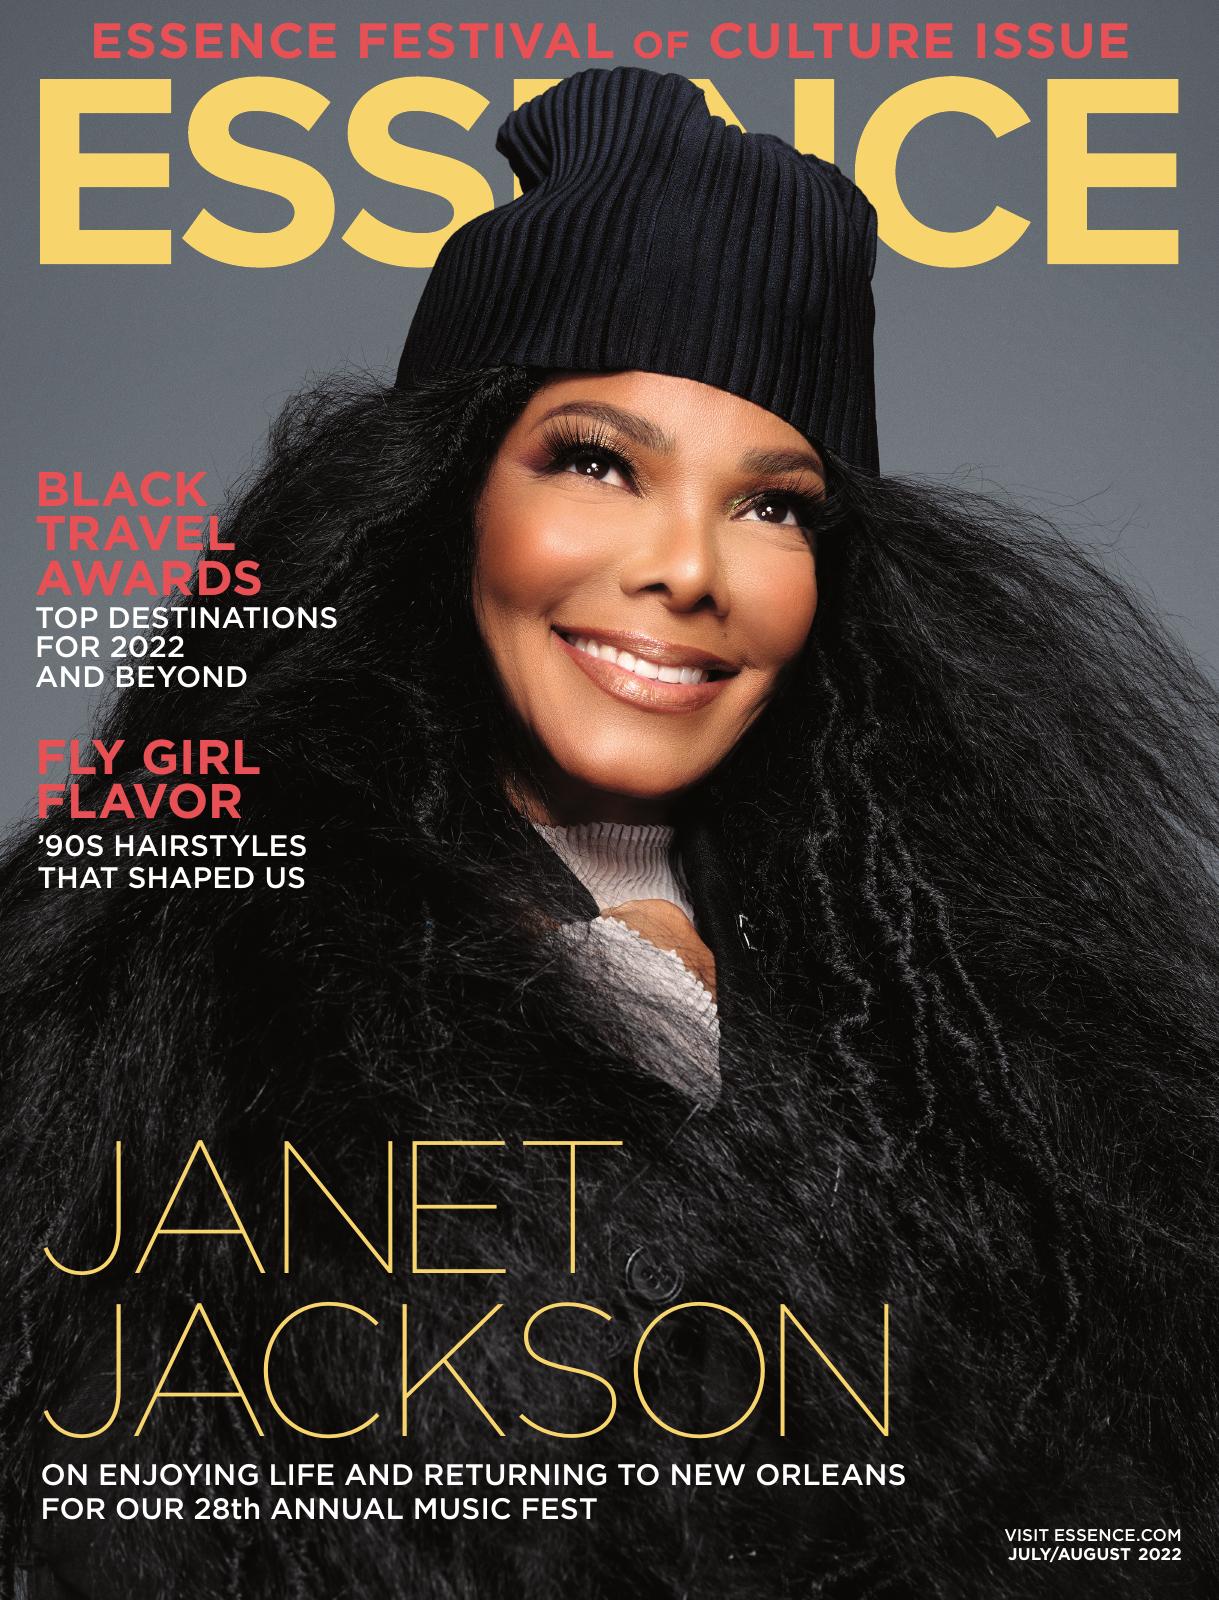 A Look Back At Janet Jackson On The Cover of ESSENCE Over The Years